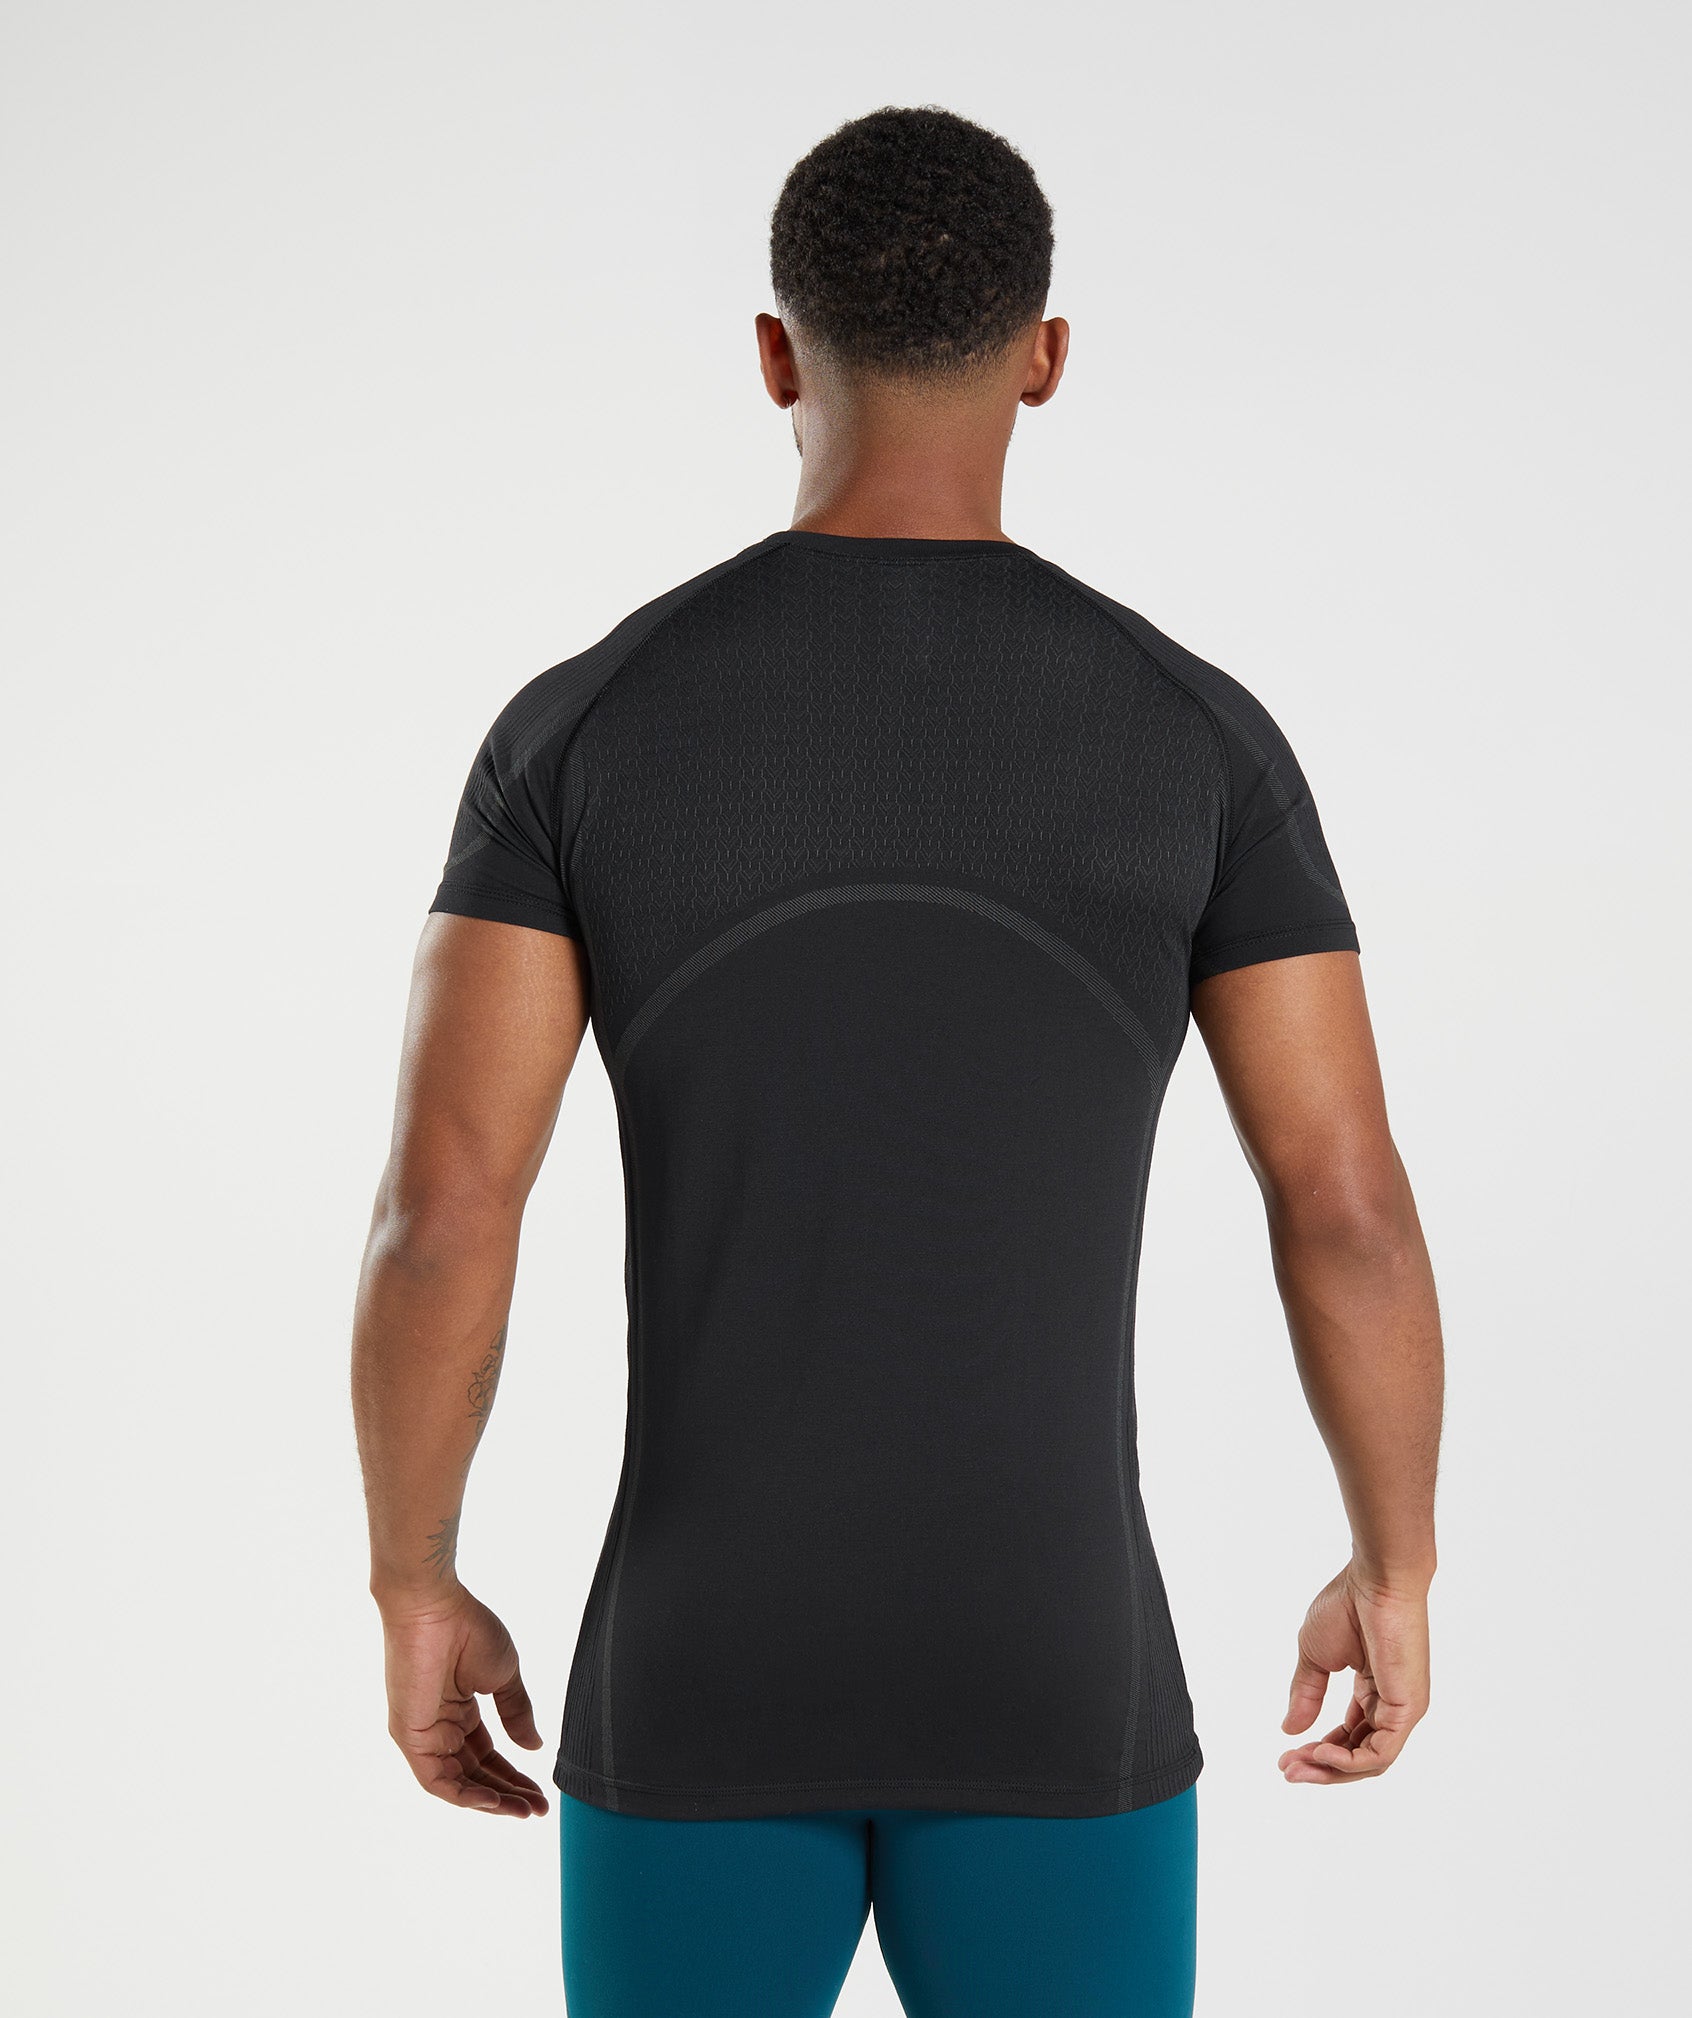 315 Seamless T-Shirt in Black/Charcoal Grey - view 2